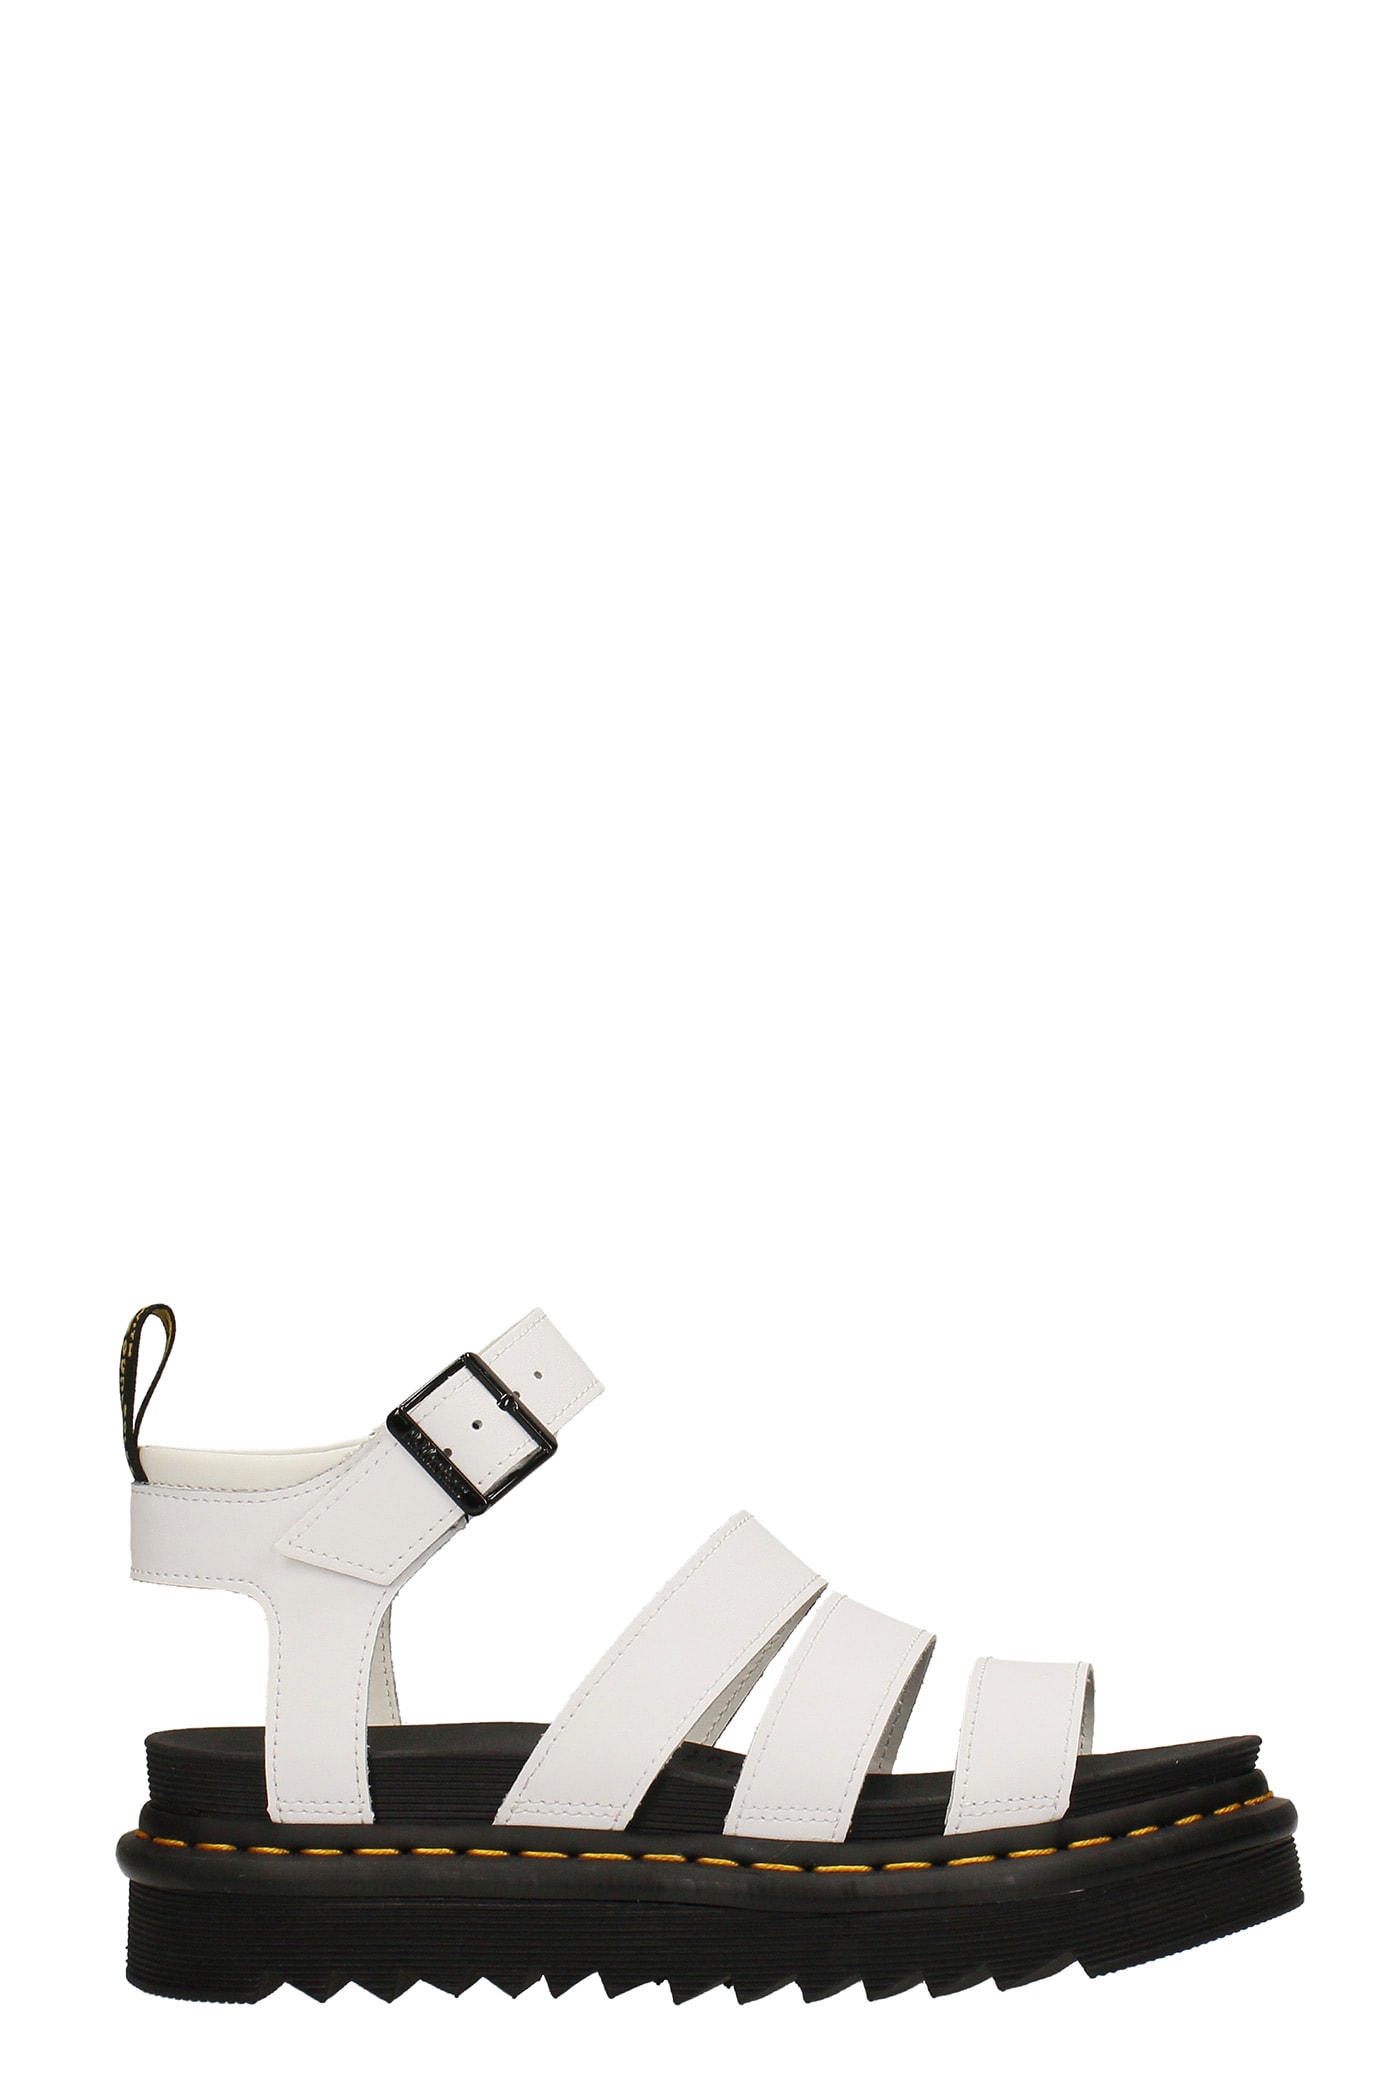 Dr. Martens Blaire Sandals In White Leather